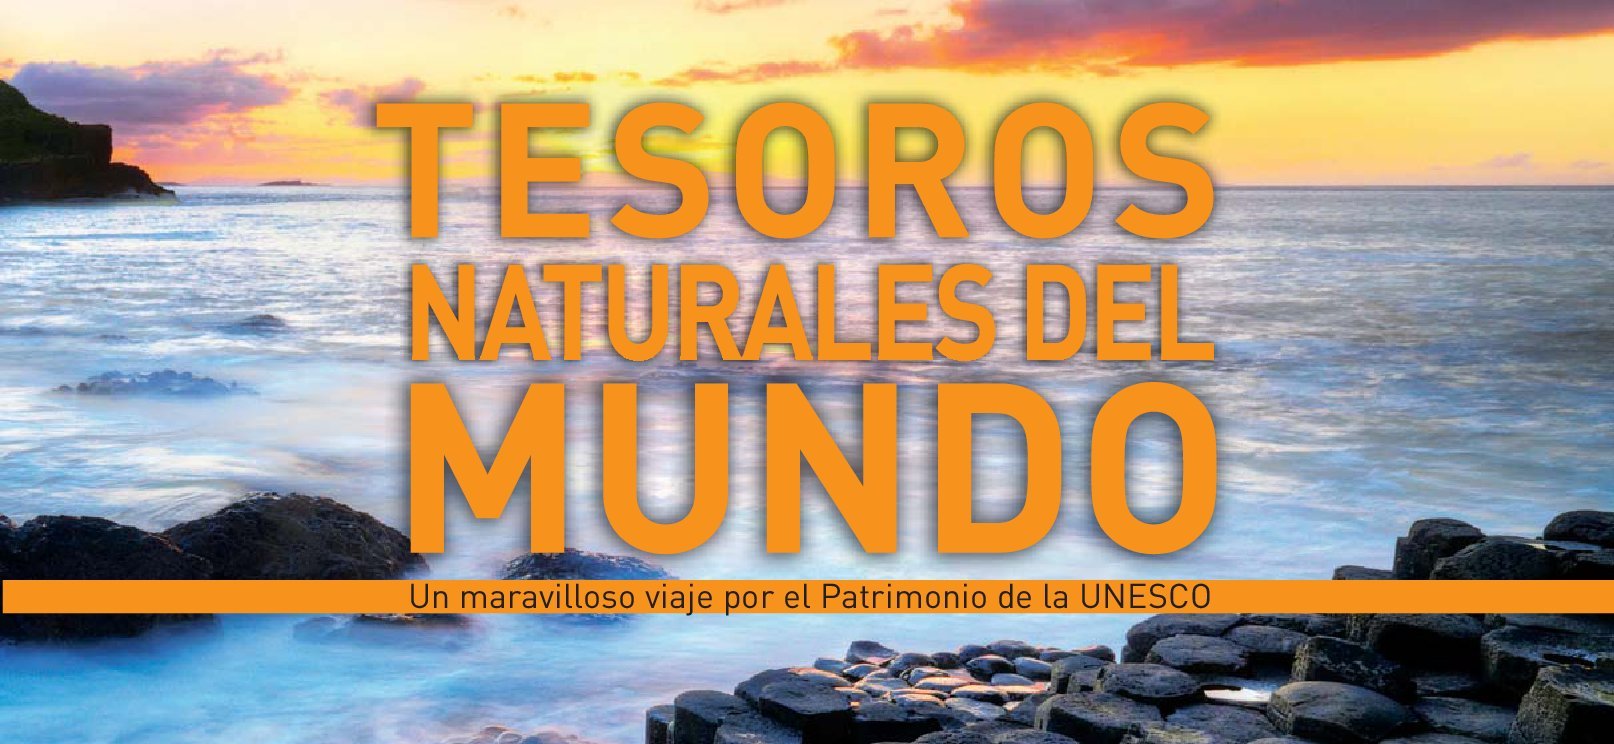 Natural Treasures of the World. A marvellous journey through UNESCO Natural Heritage. 